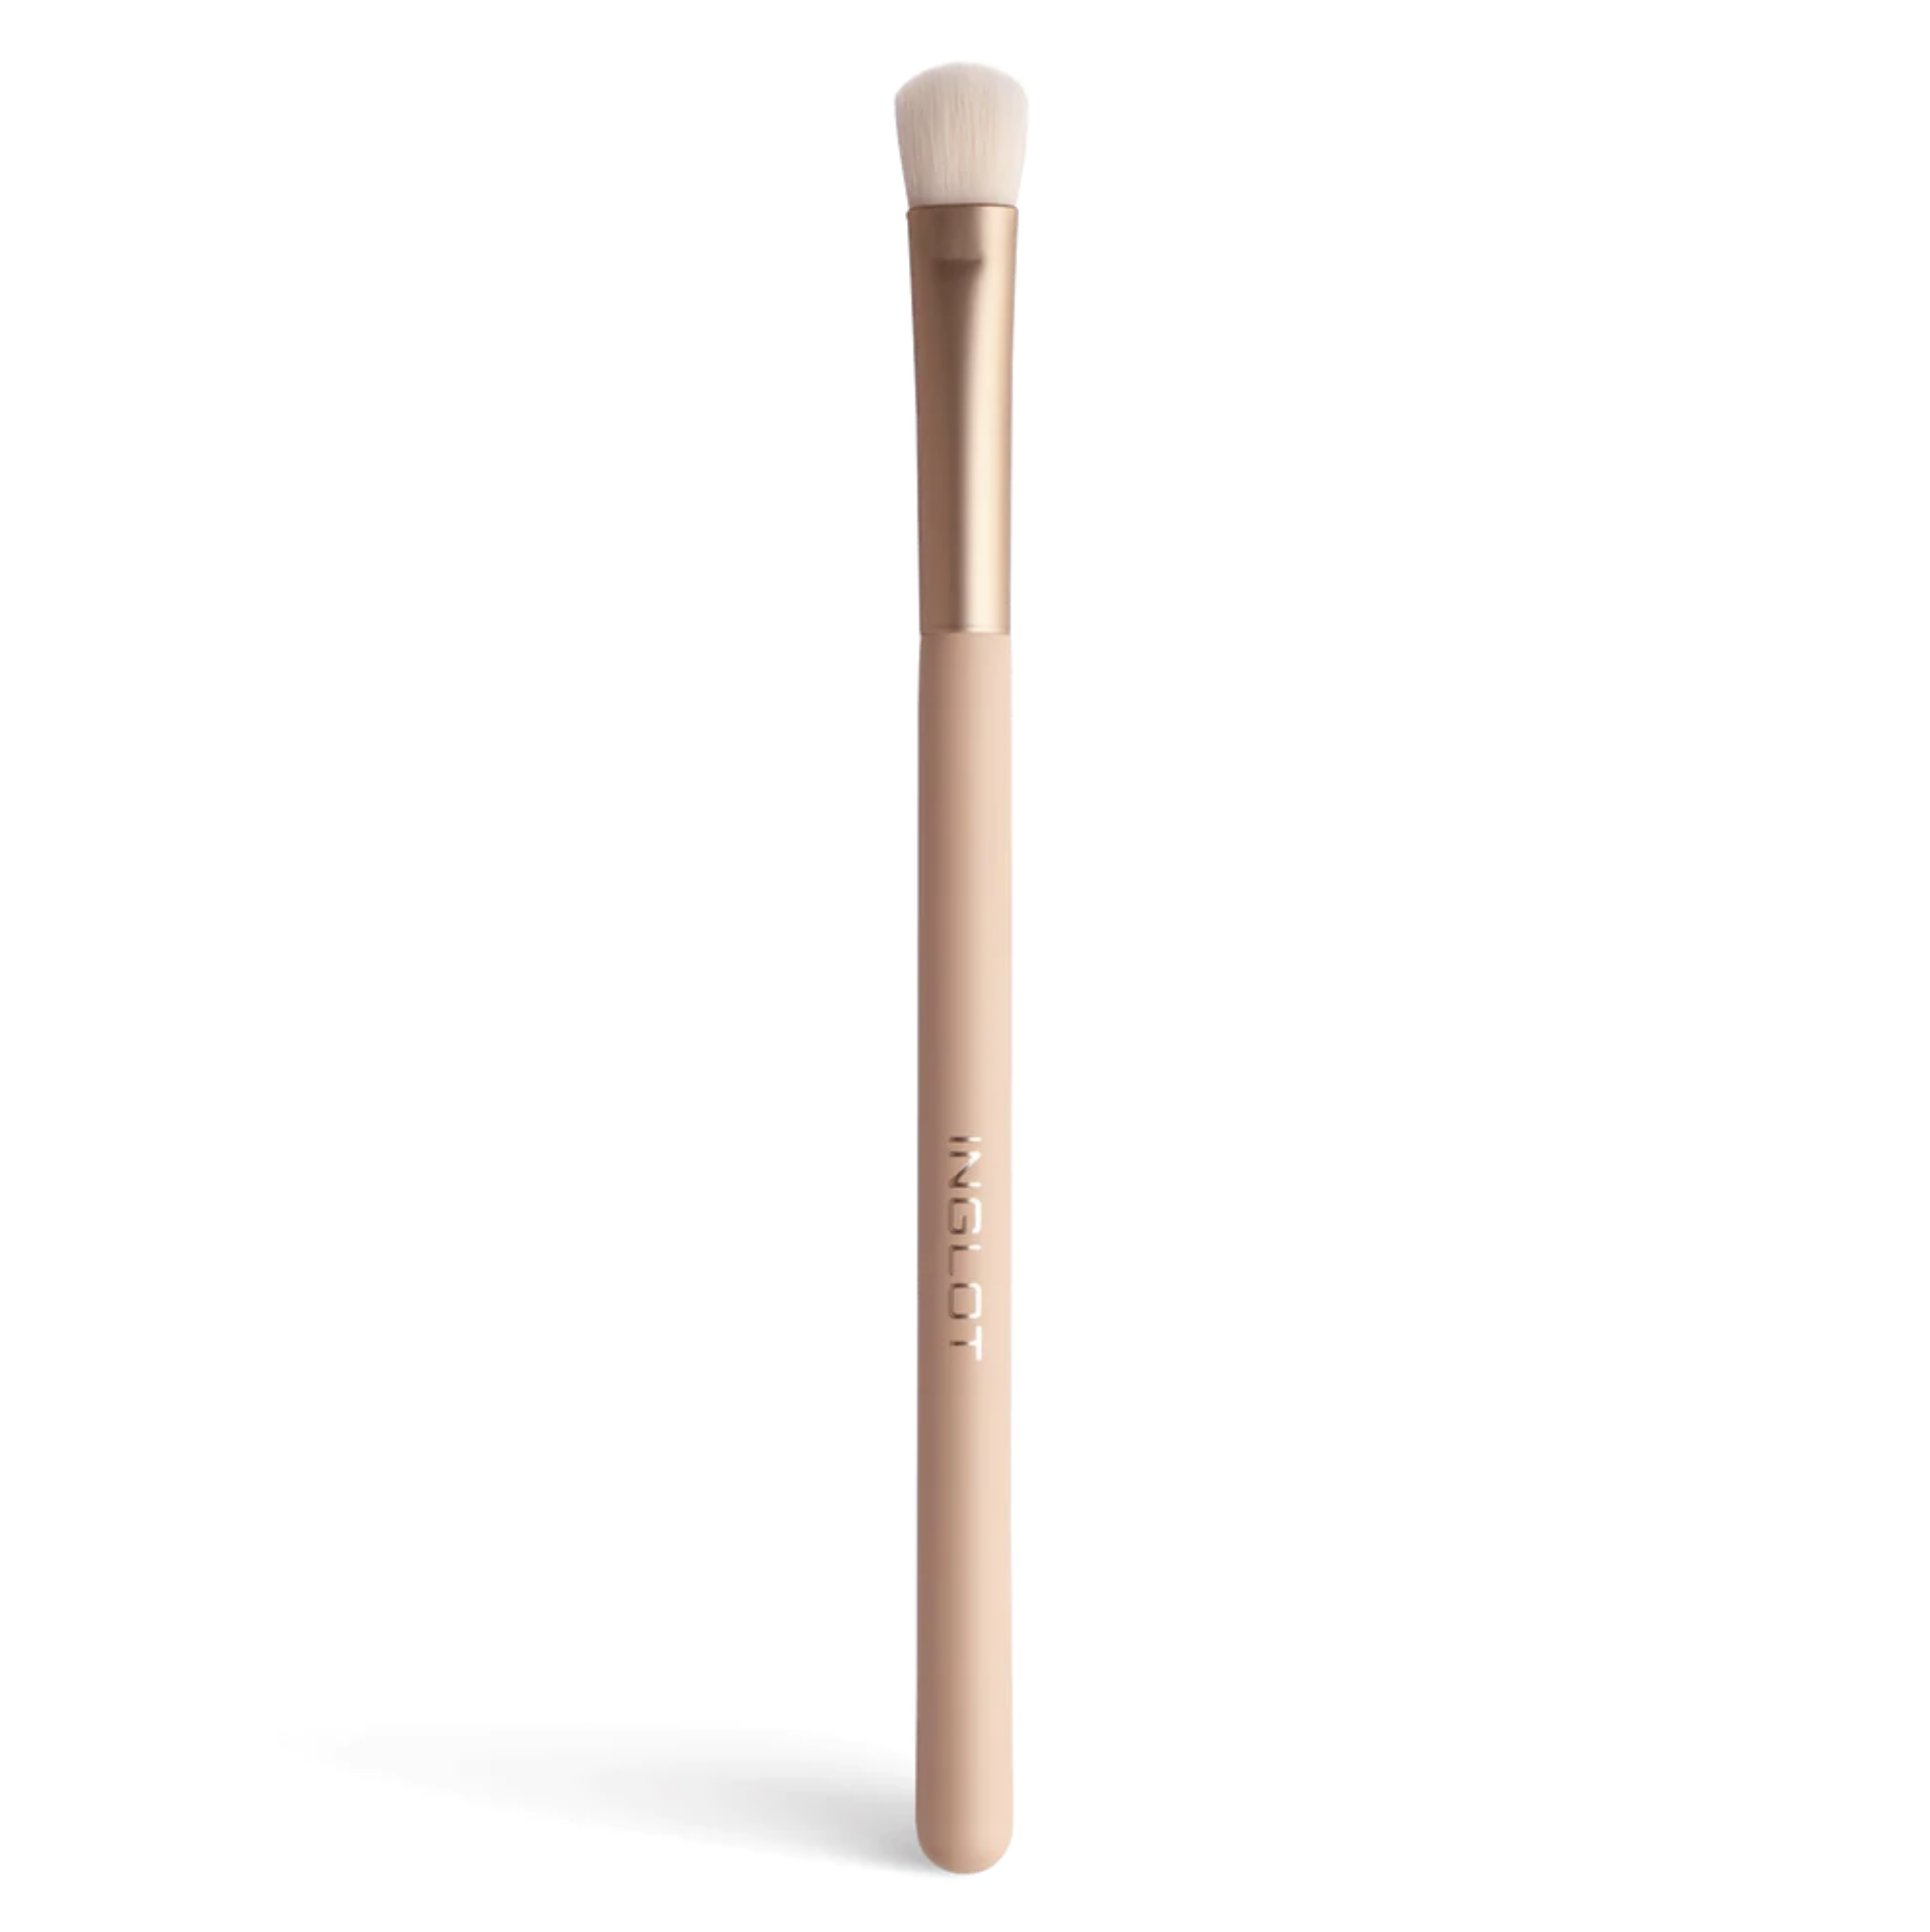 Inglot The Complete Beauty Tools Edit, ulti use eye brush